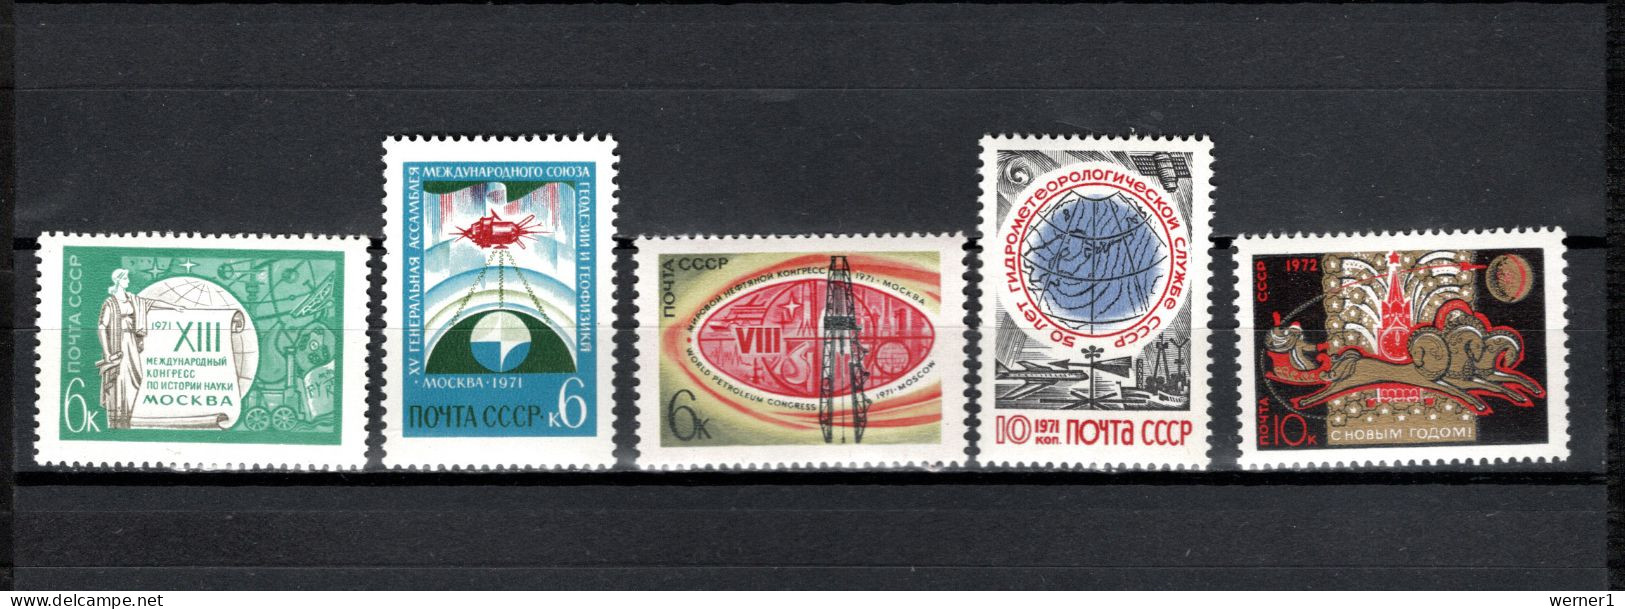 USSR Russia 1971 Space, International Congress Moscow, Meteorology, New Year 5 Stamps MNH - Russia & URSS